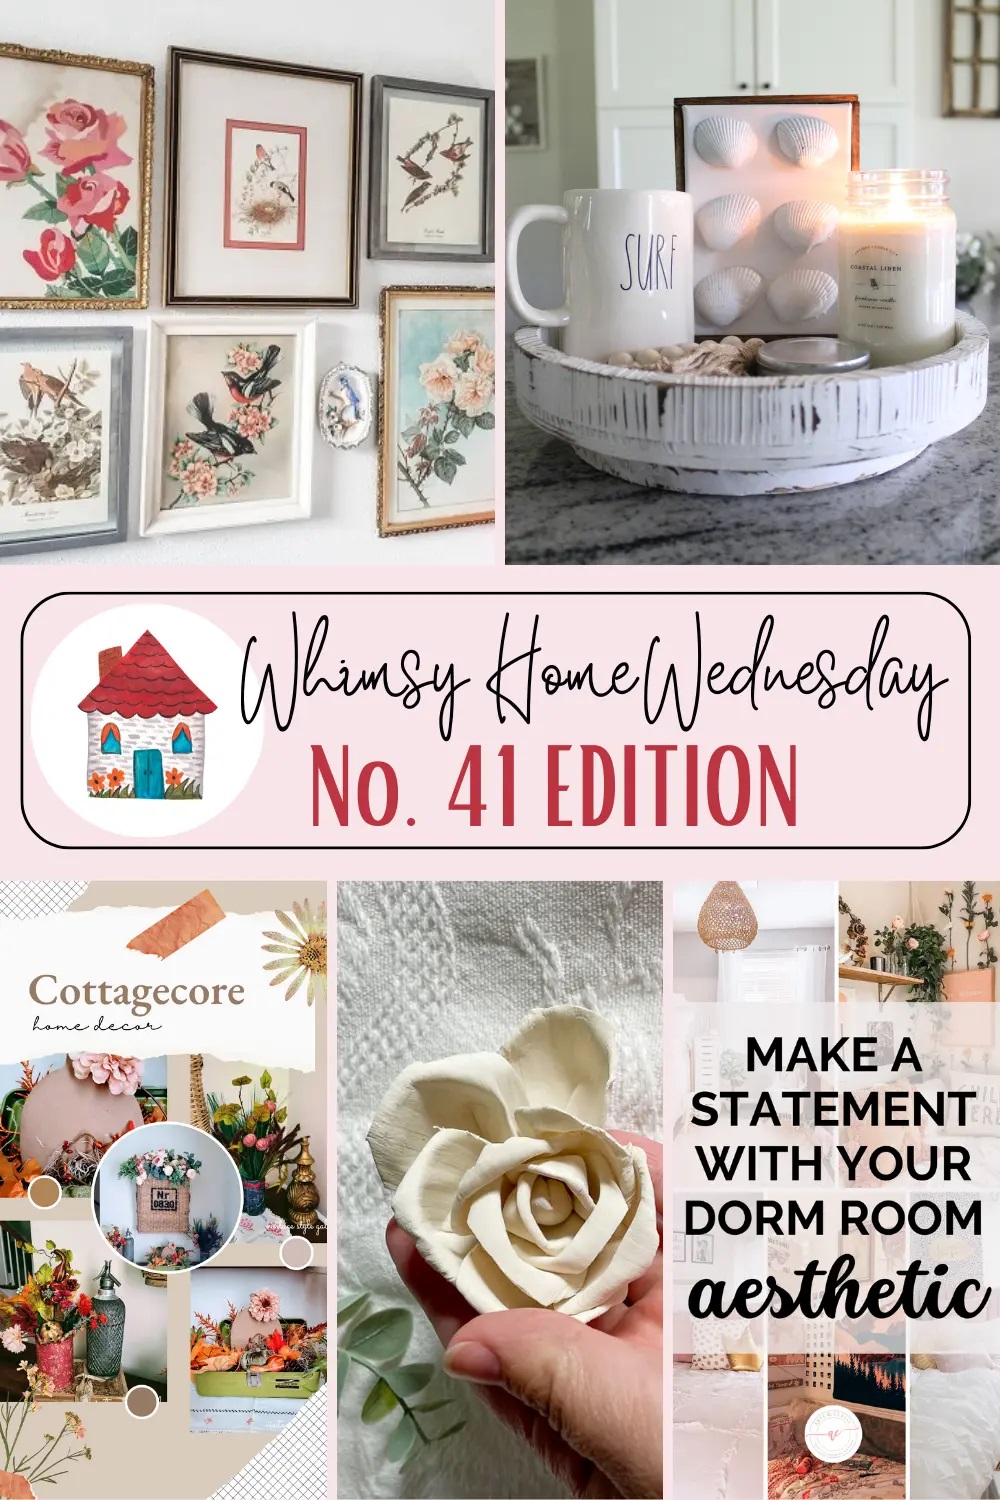 Join us on Whimsy Home Wednesday Blog Link Party No. 41 and see host projects, the features from the previous week and link up your posts!